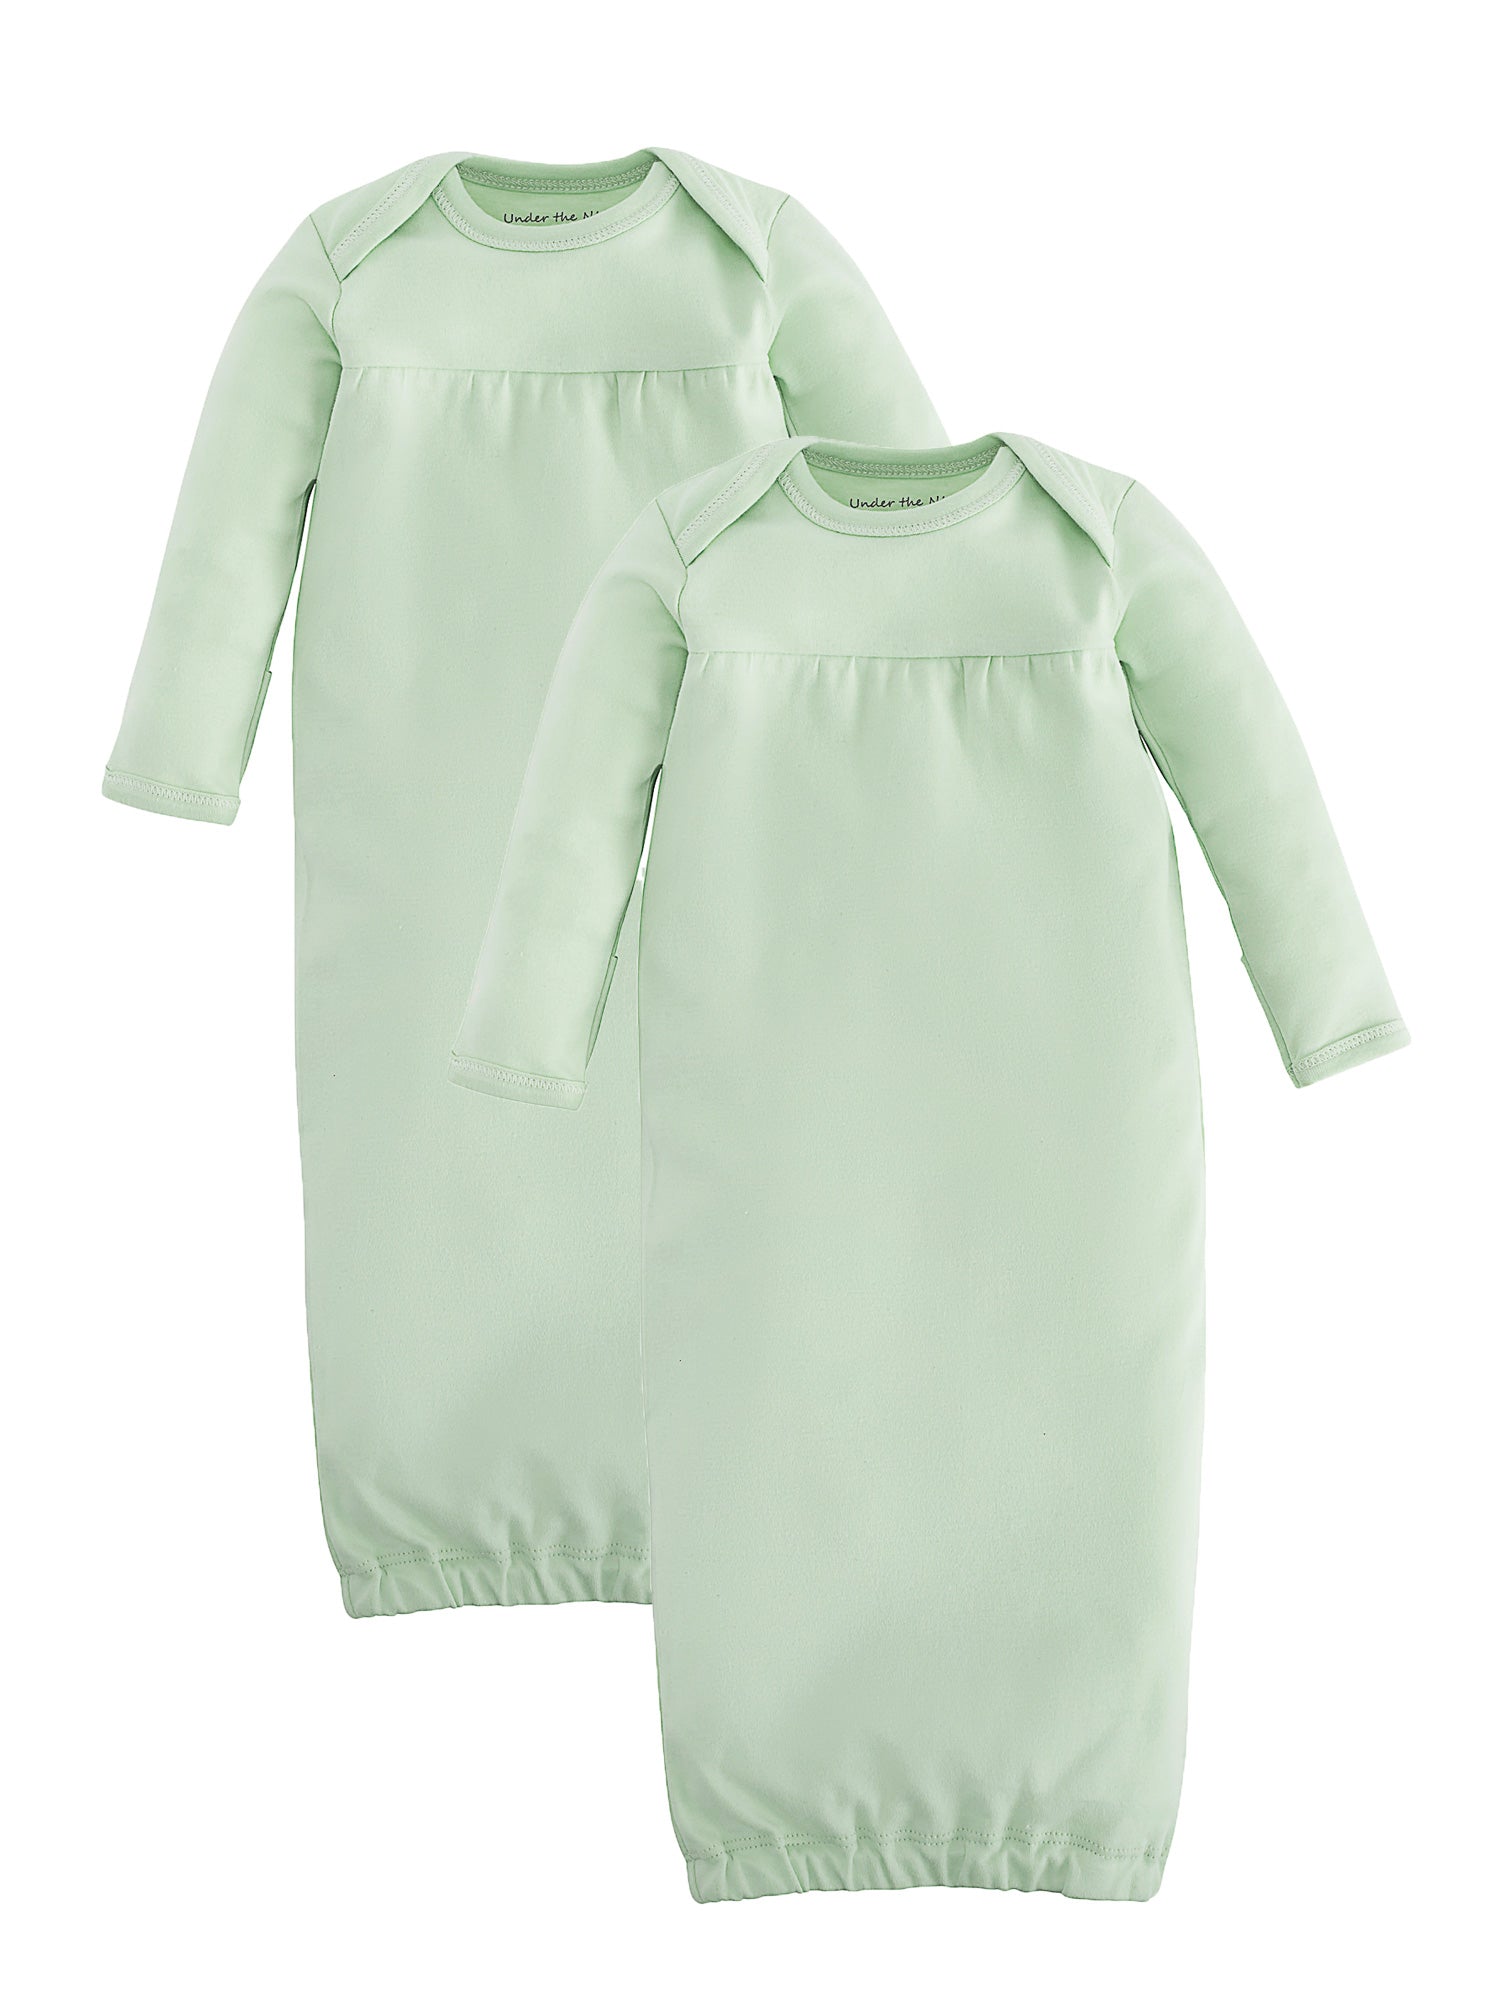 onesie gowns for babies